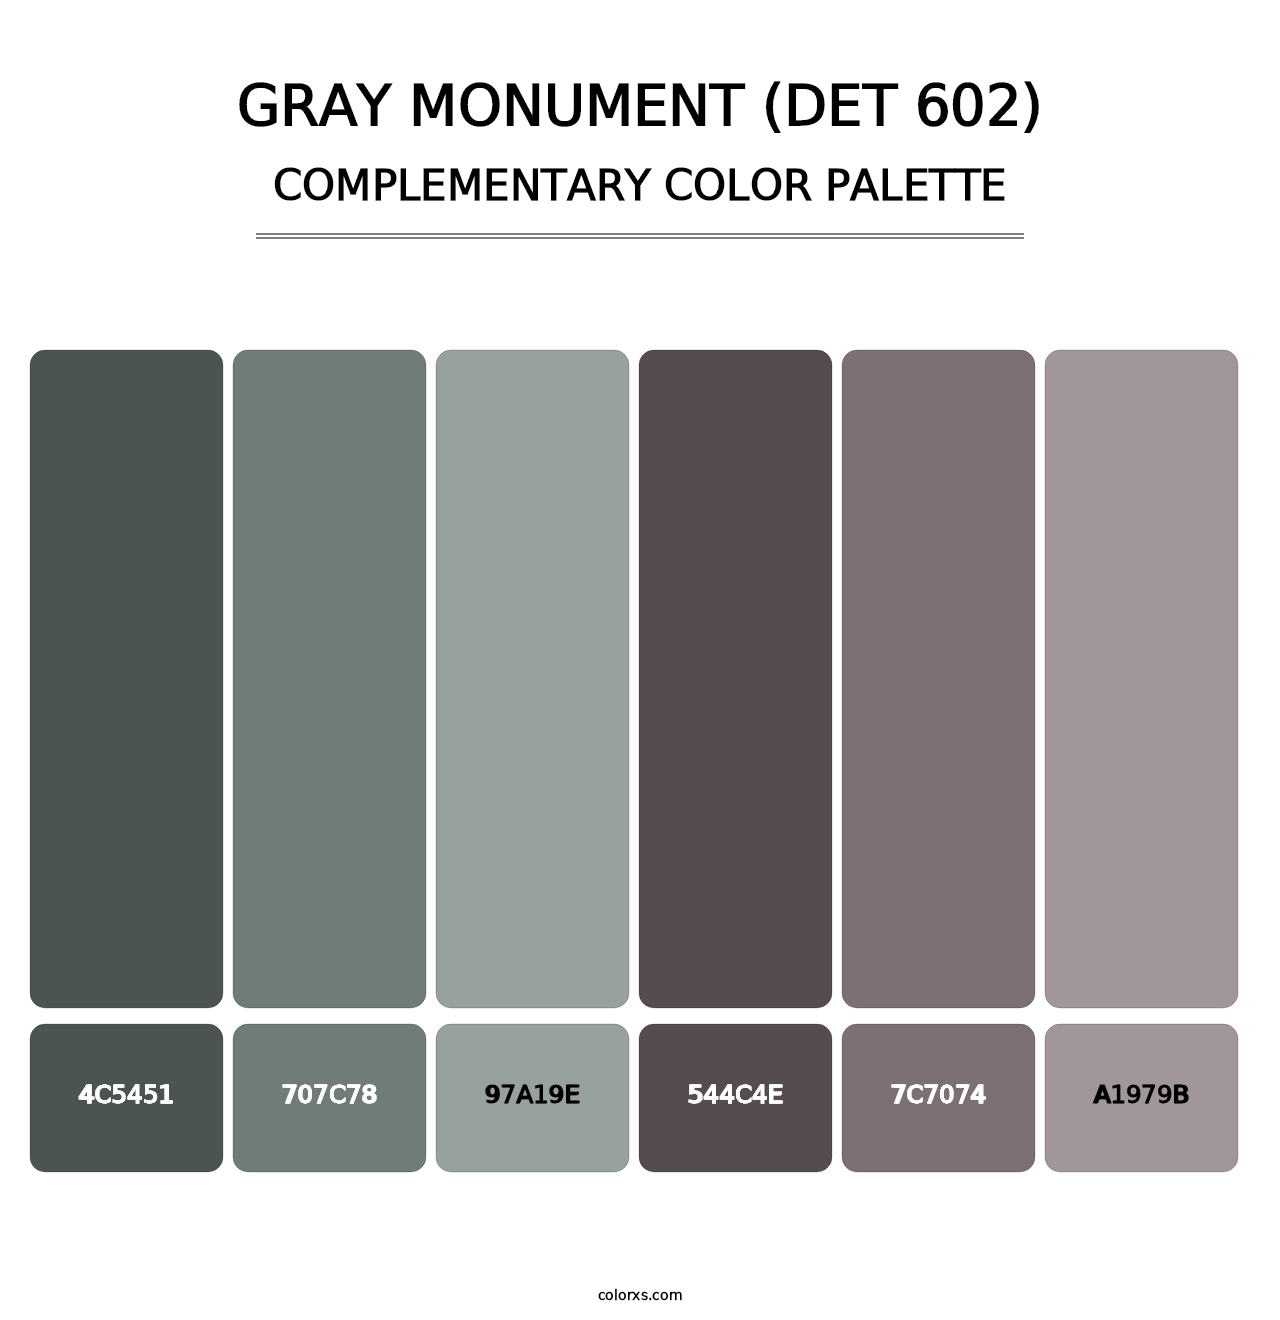 Gray Monument (DET 602) - Complementary Color Palette